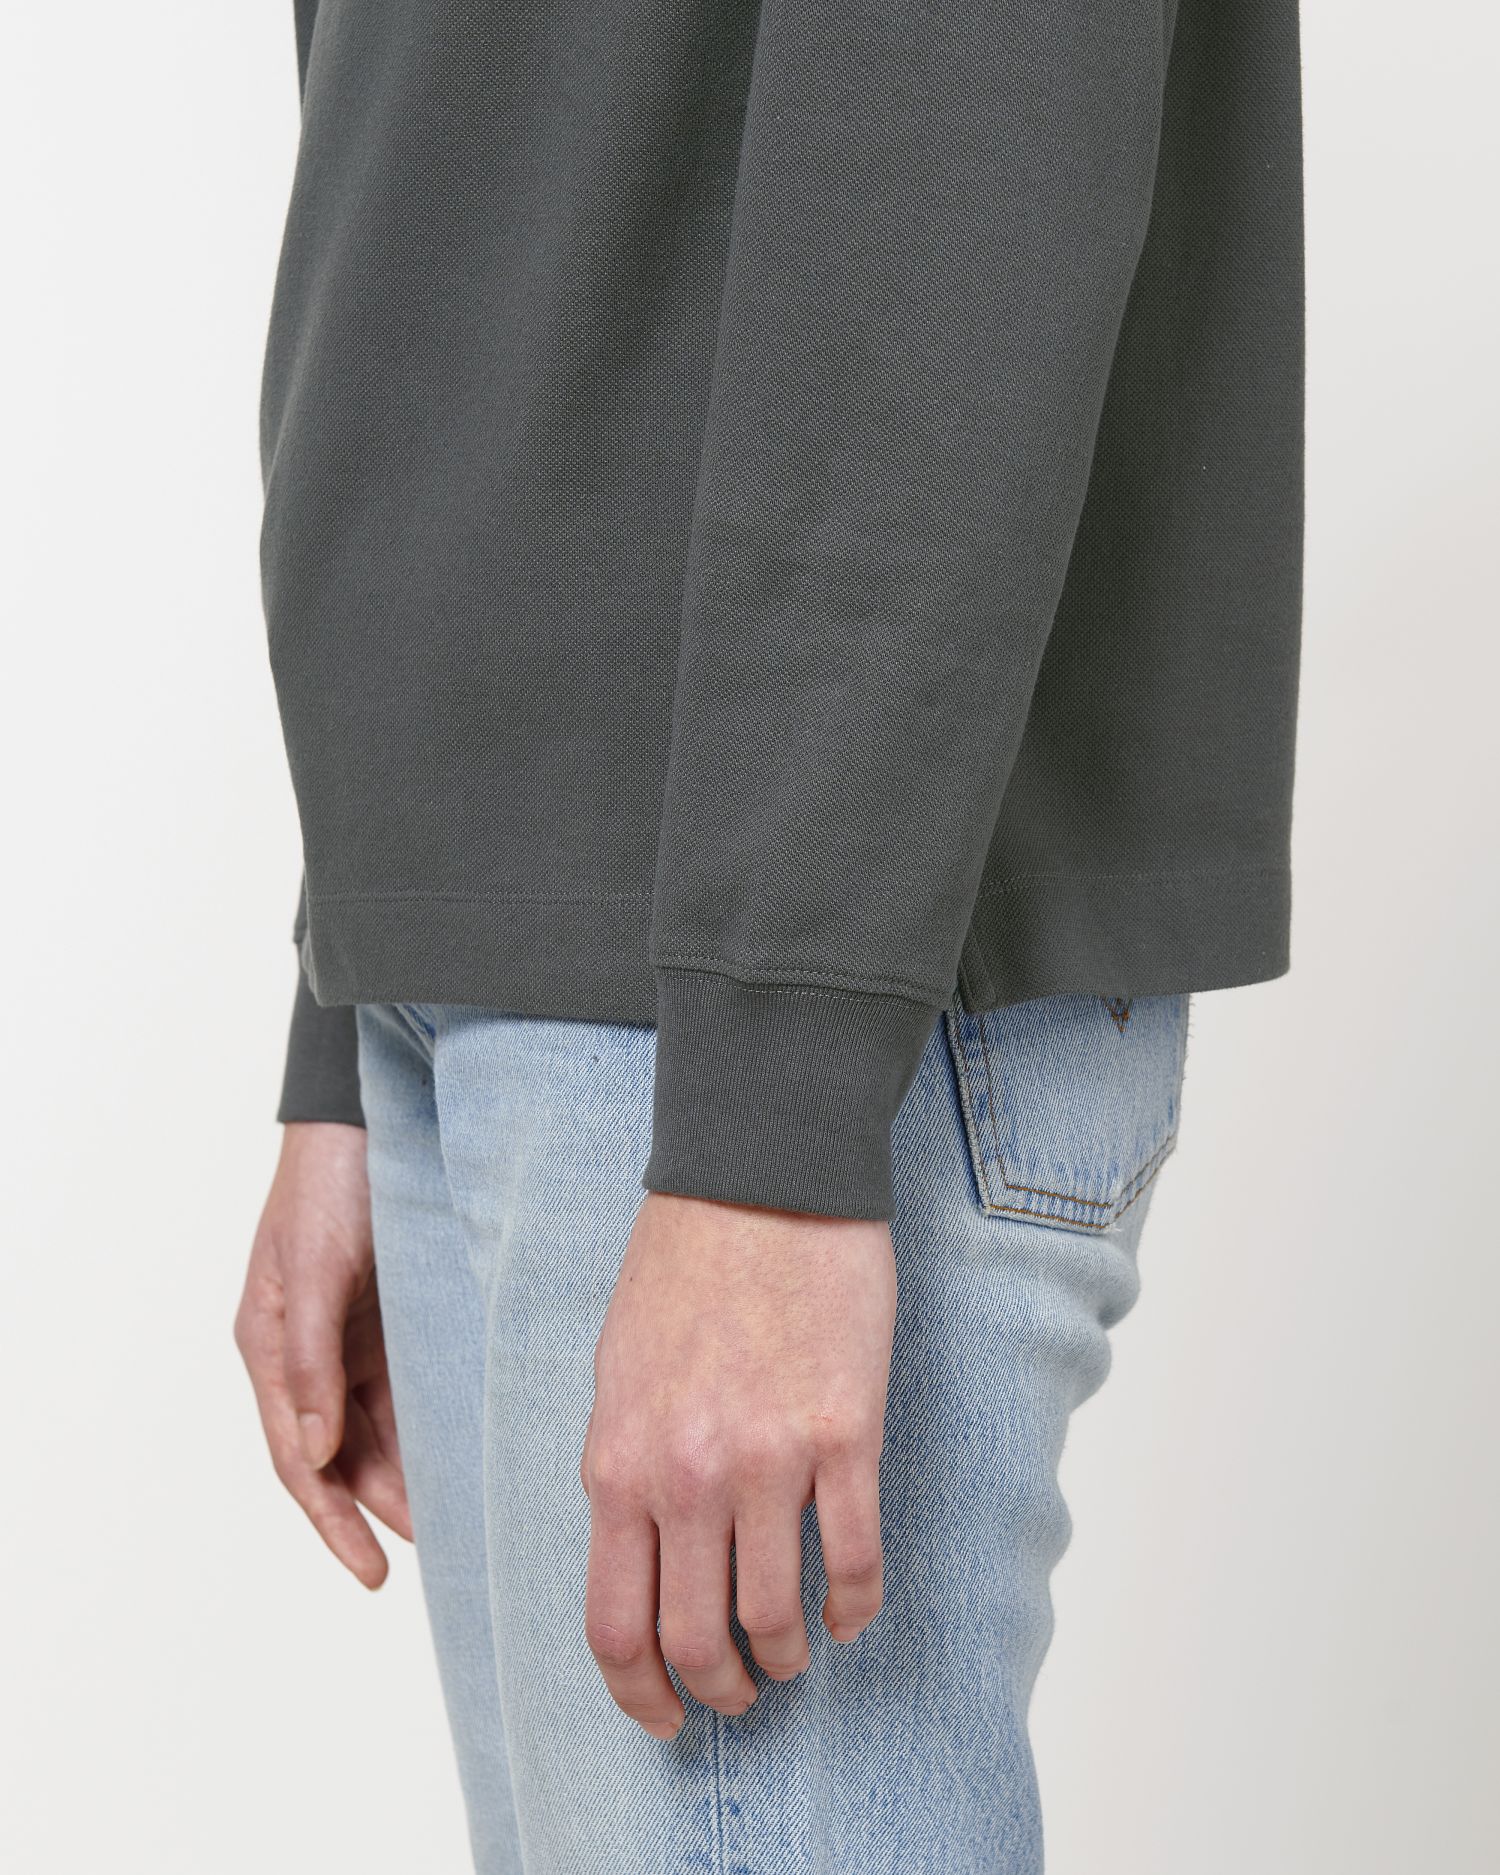  Prepster Long Sleeve in Farbe Anthracite